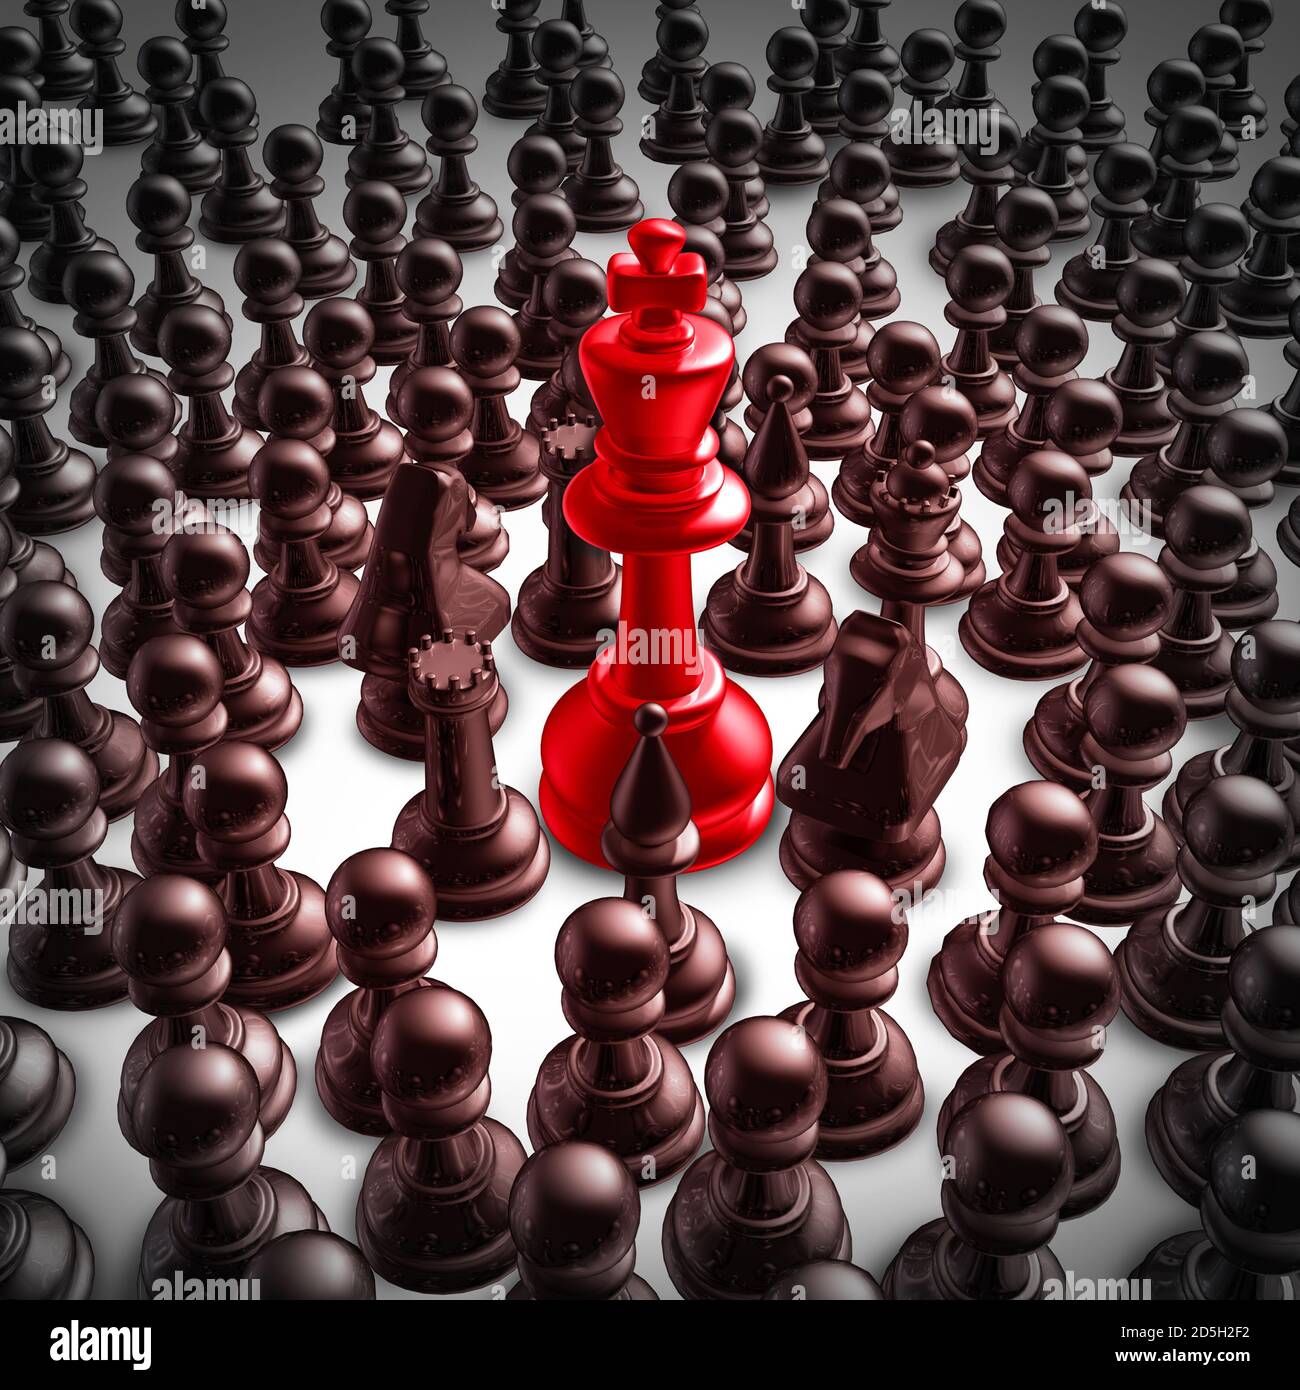 Golden Chess Board With Several White And Black Pieces On Top Background,  3d Chessboard With Chess, Business Concept, Rendered Illustration  Background Image And Wallpaper for Free Download